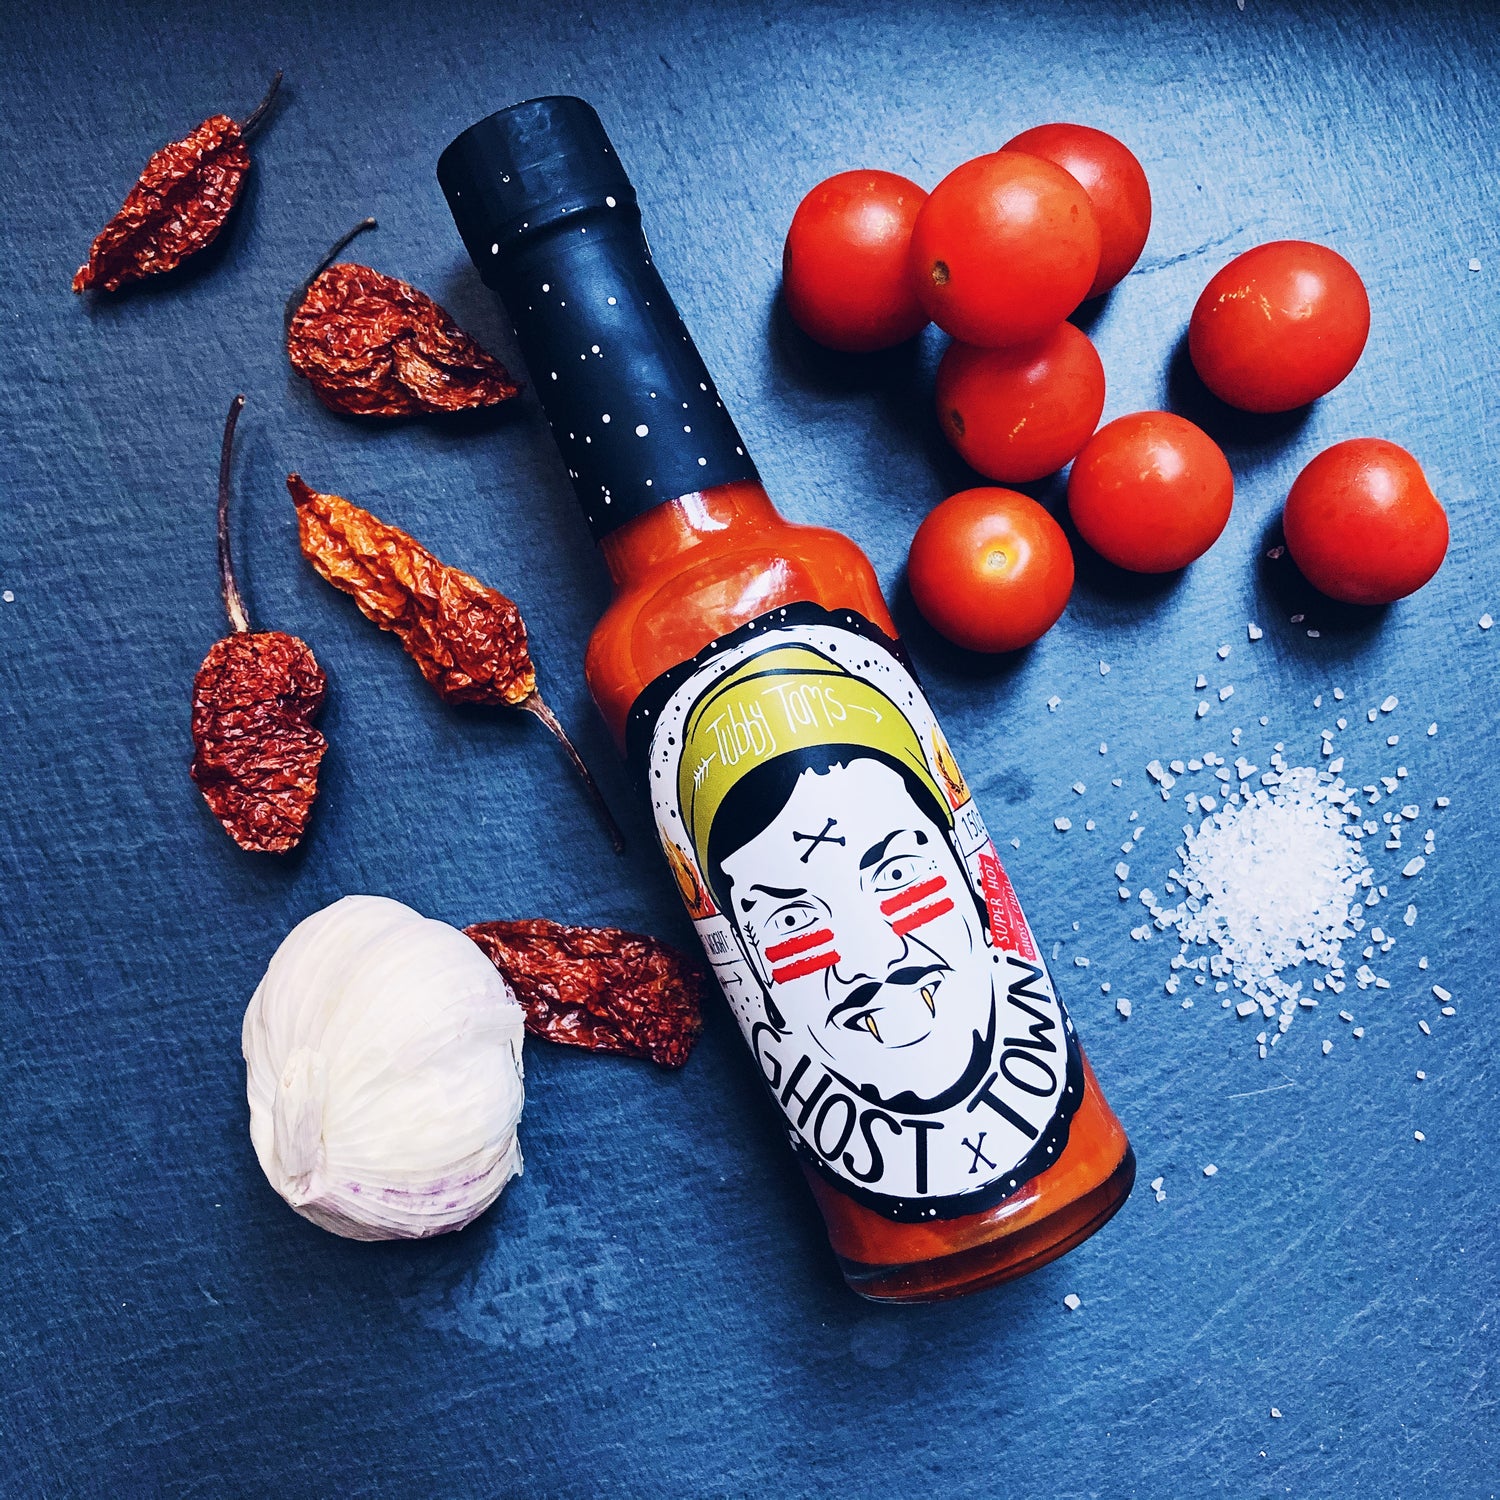 Hot Sauce Review - Tubby Tom's Ghost Town